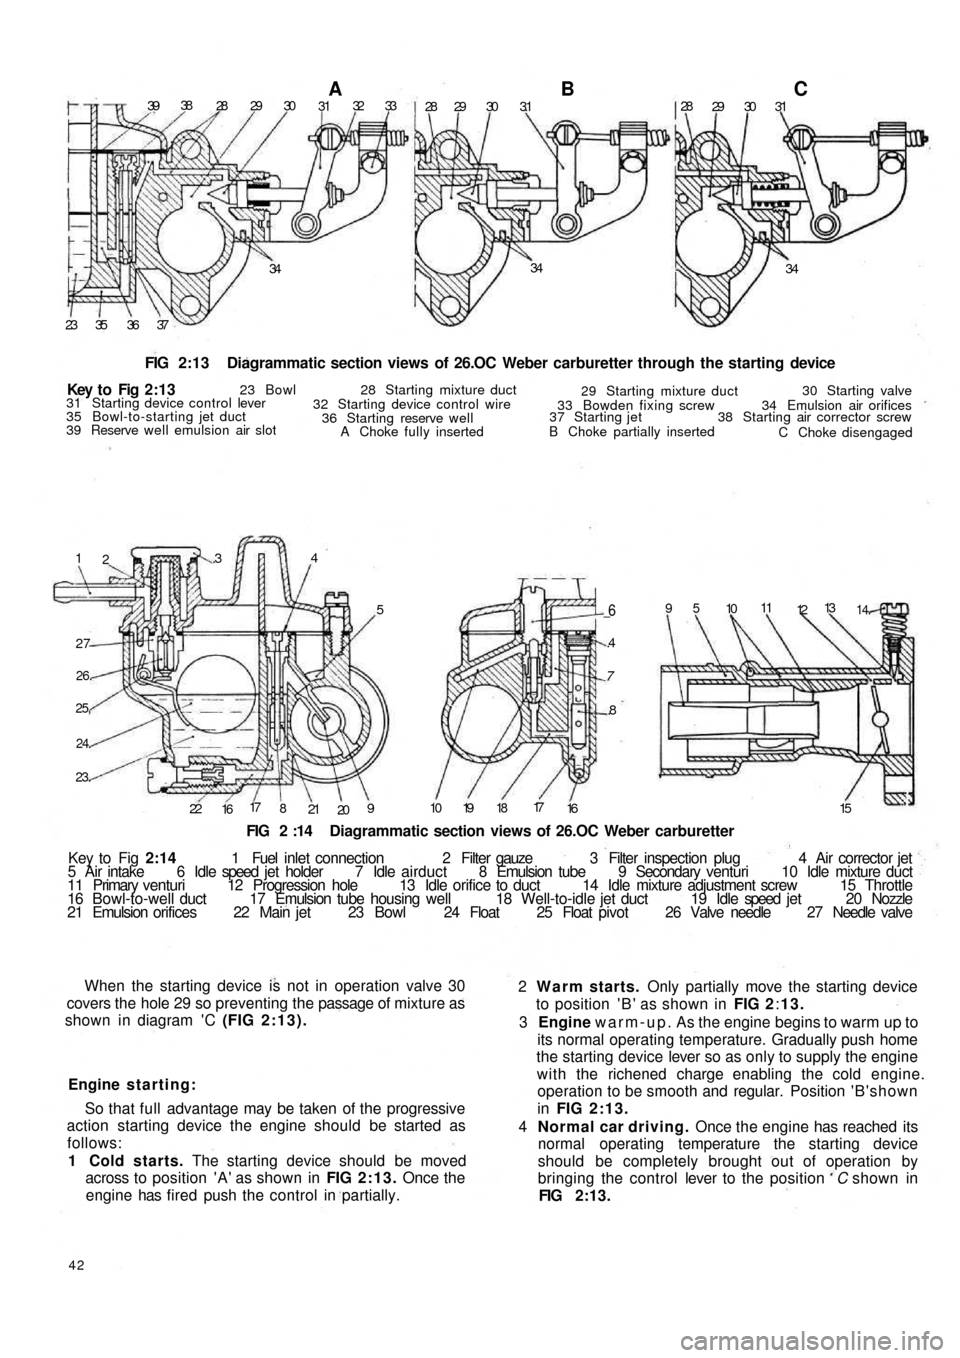 FIAT 500 1972 1.G Workshop Manual 3938
28 29 30A3132 33
28 29 30 3.1B28
29 30 31C
34 34
34
37 36 35 23
FIG 2:13  Diagrammatic section views of 26.OC Weber carburetter through the starting device
1
2.34
5
27
26.
25,
24.
23.
22
1617
8
2